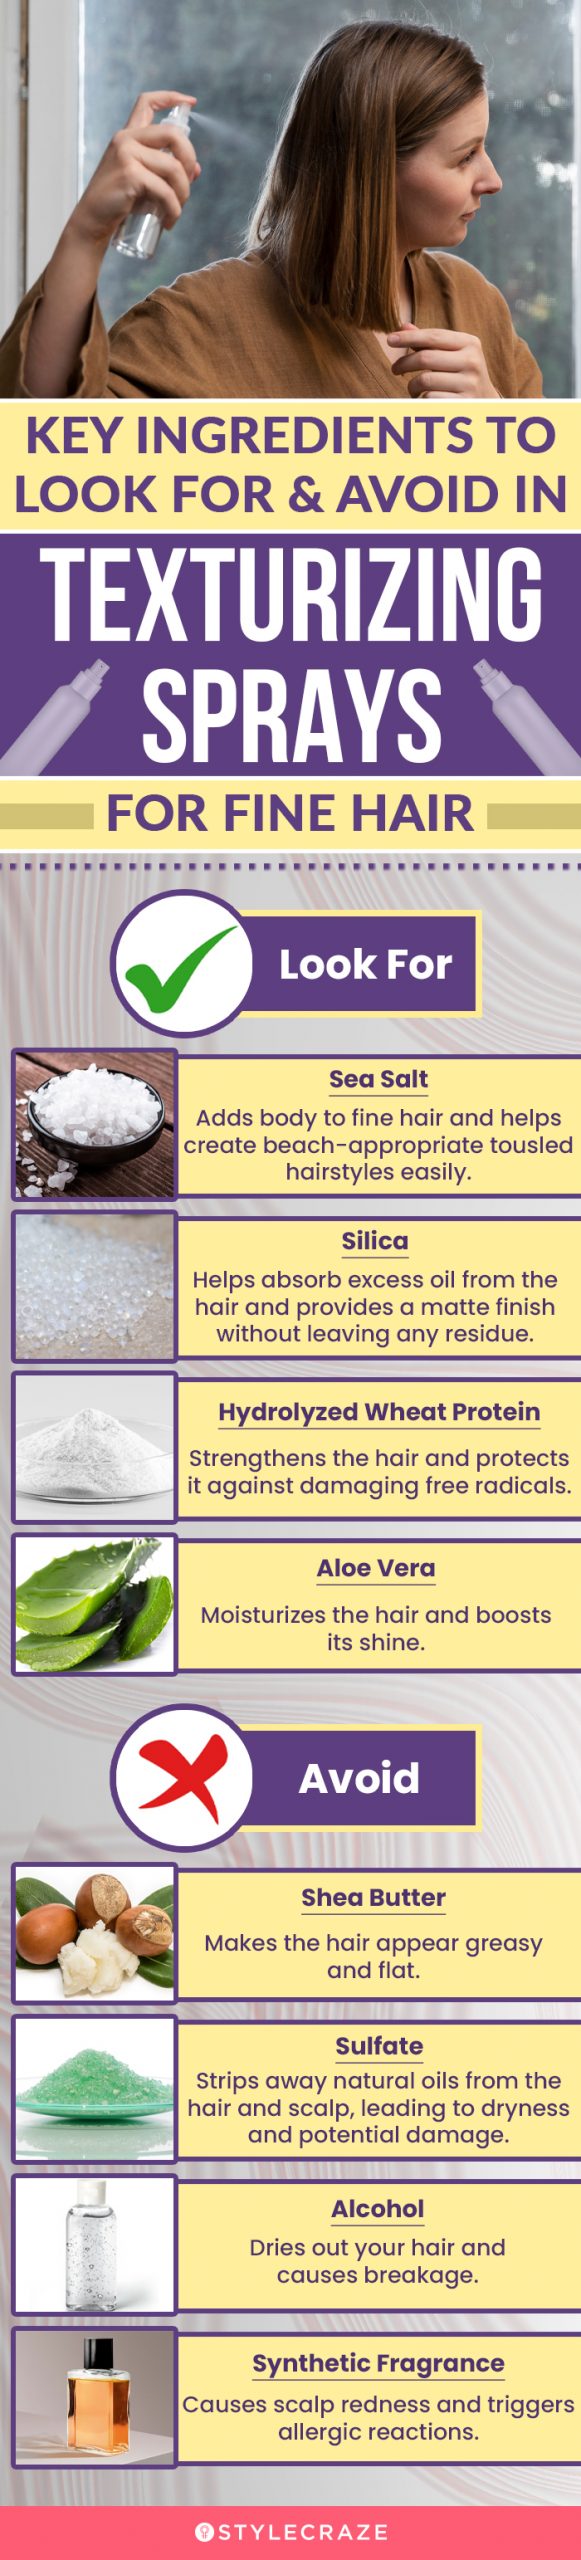 Key Ingredients To Look For & Avoid In Texturizing Sprays For Fine Hair (infographic)